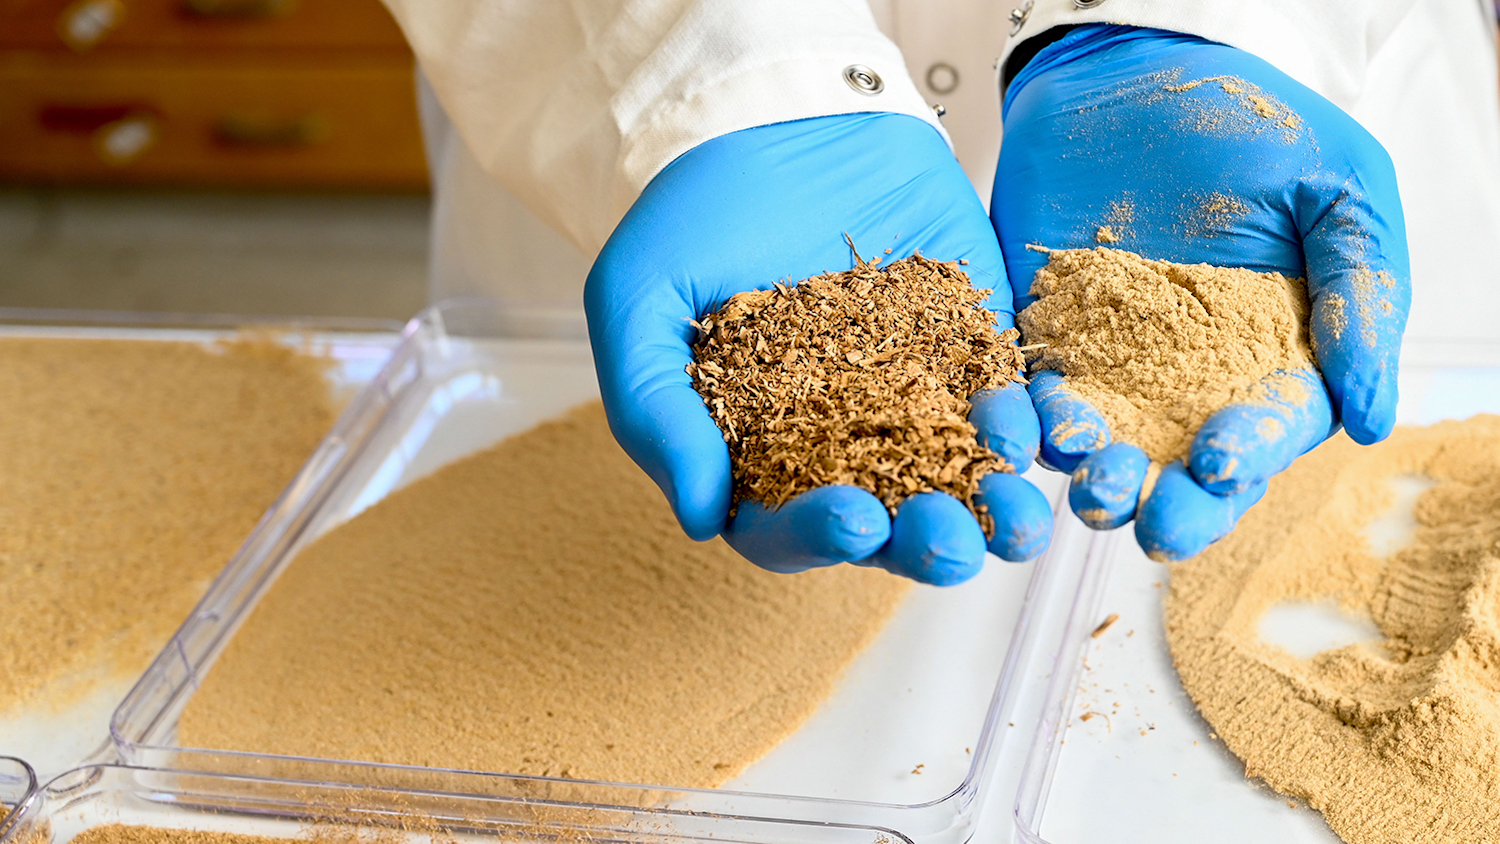 NC State professor Lokendra Pal holds two samples of sawdust powder in his hands - New Biomaterial Could Save Our Oceans from Plastic Pollution - College of Natural Resources News - NC State University